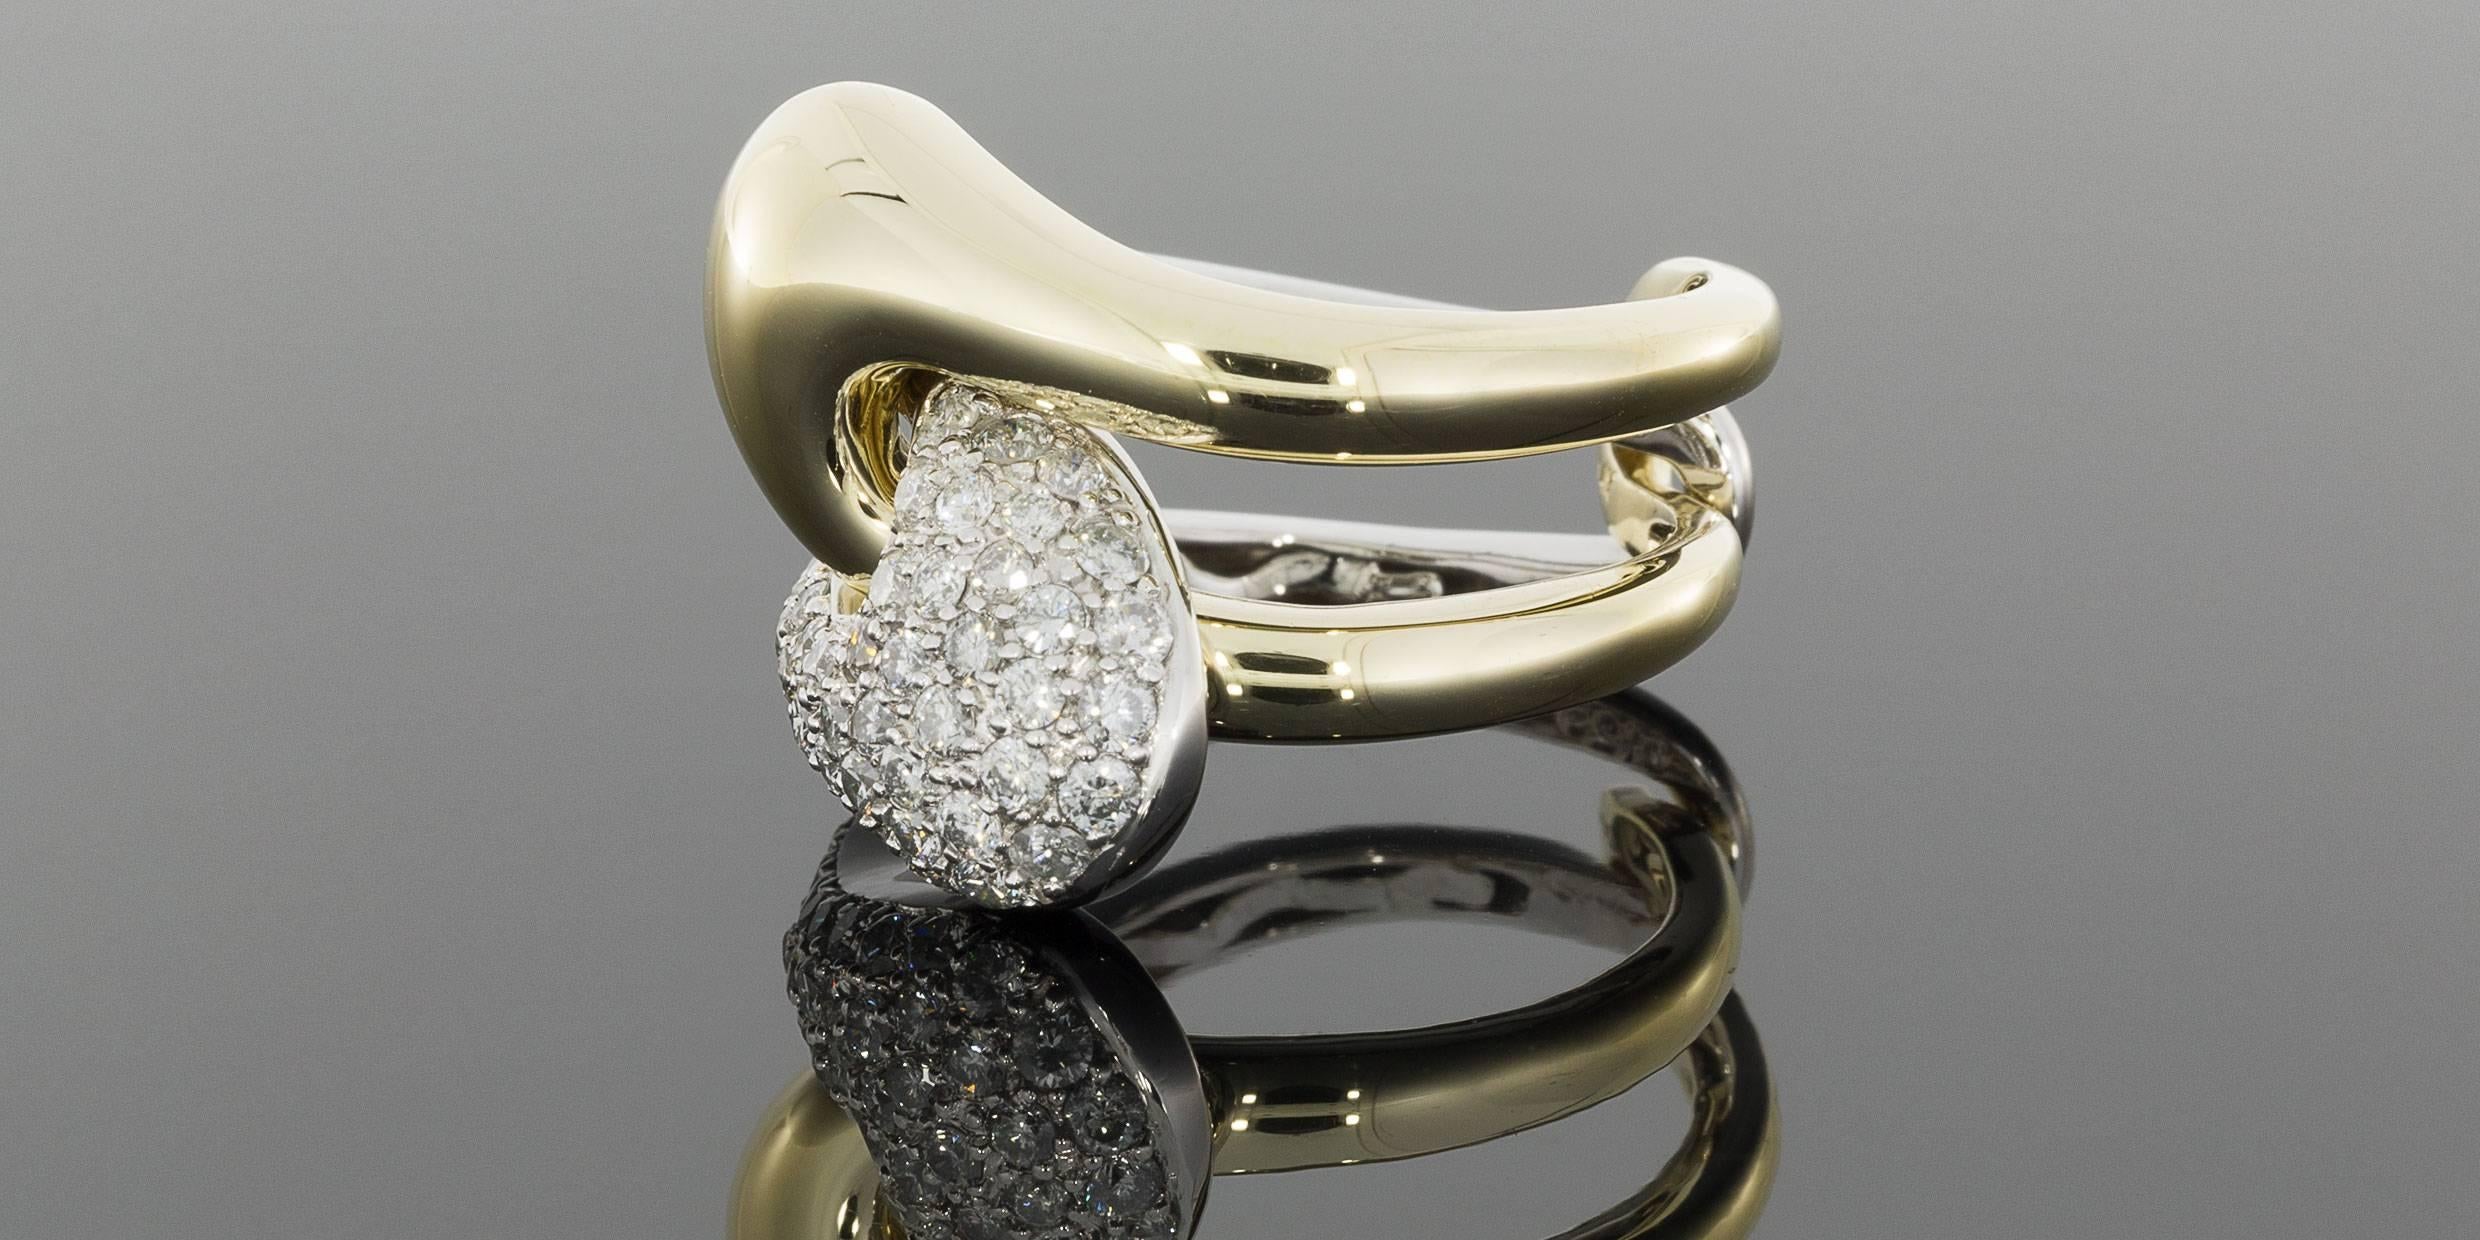 This amazing ring is sparkly, beautiful, & quite unique! It is a 2-piece, interlocking puzzle ring featuring 1 carat total weight in pave set round diamonds. The 2 pieces fit together by placing them back to back, interlocking the shanks, &